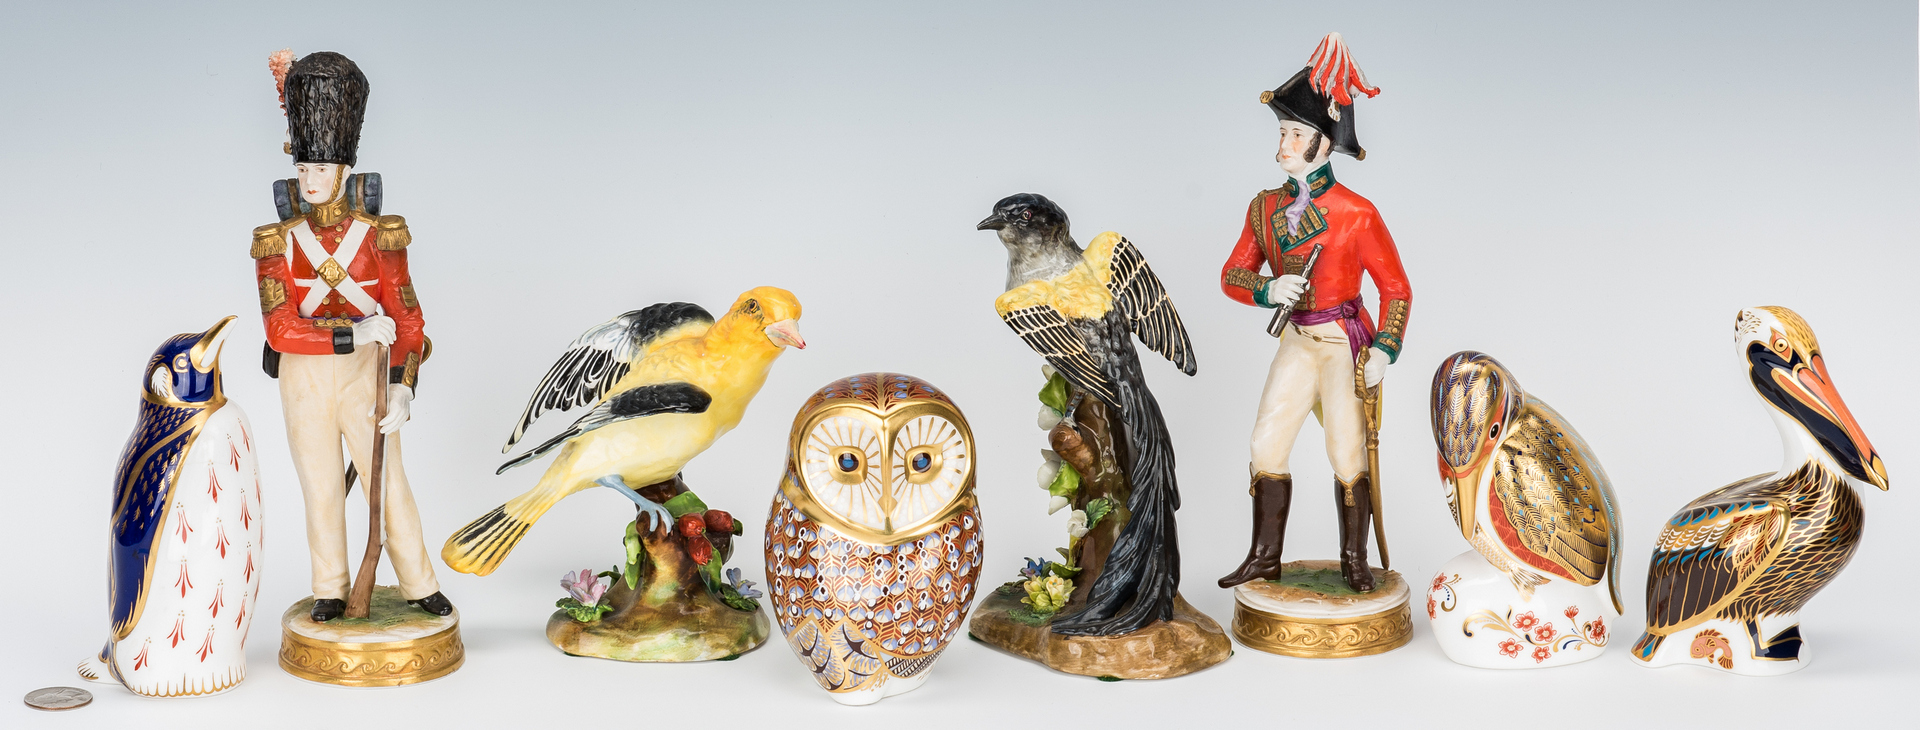 Lot 844: 8 Assorted European Porcelain Figural Items, Crown Derby & Staffordshire